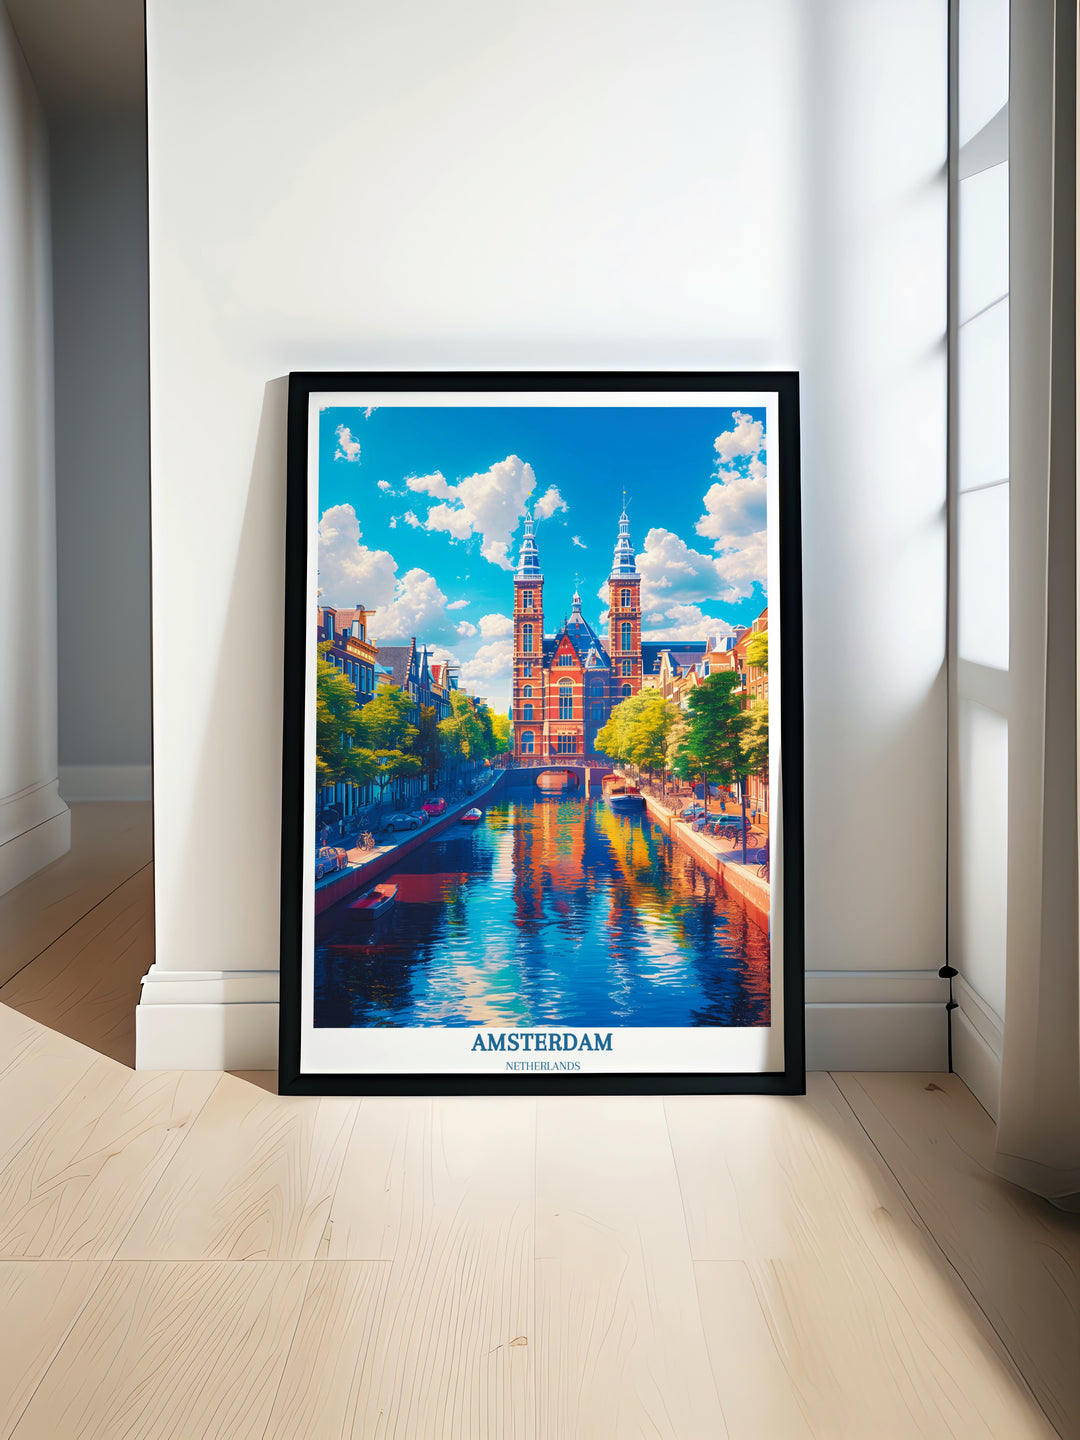 Retro-inspired wall decor: Elevate your space with this Amsterdam Travel Poster, a true conversation starter